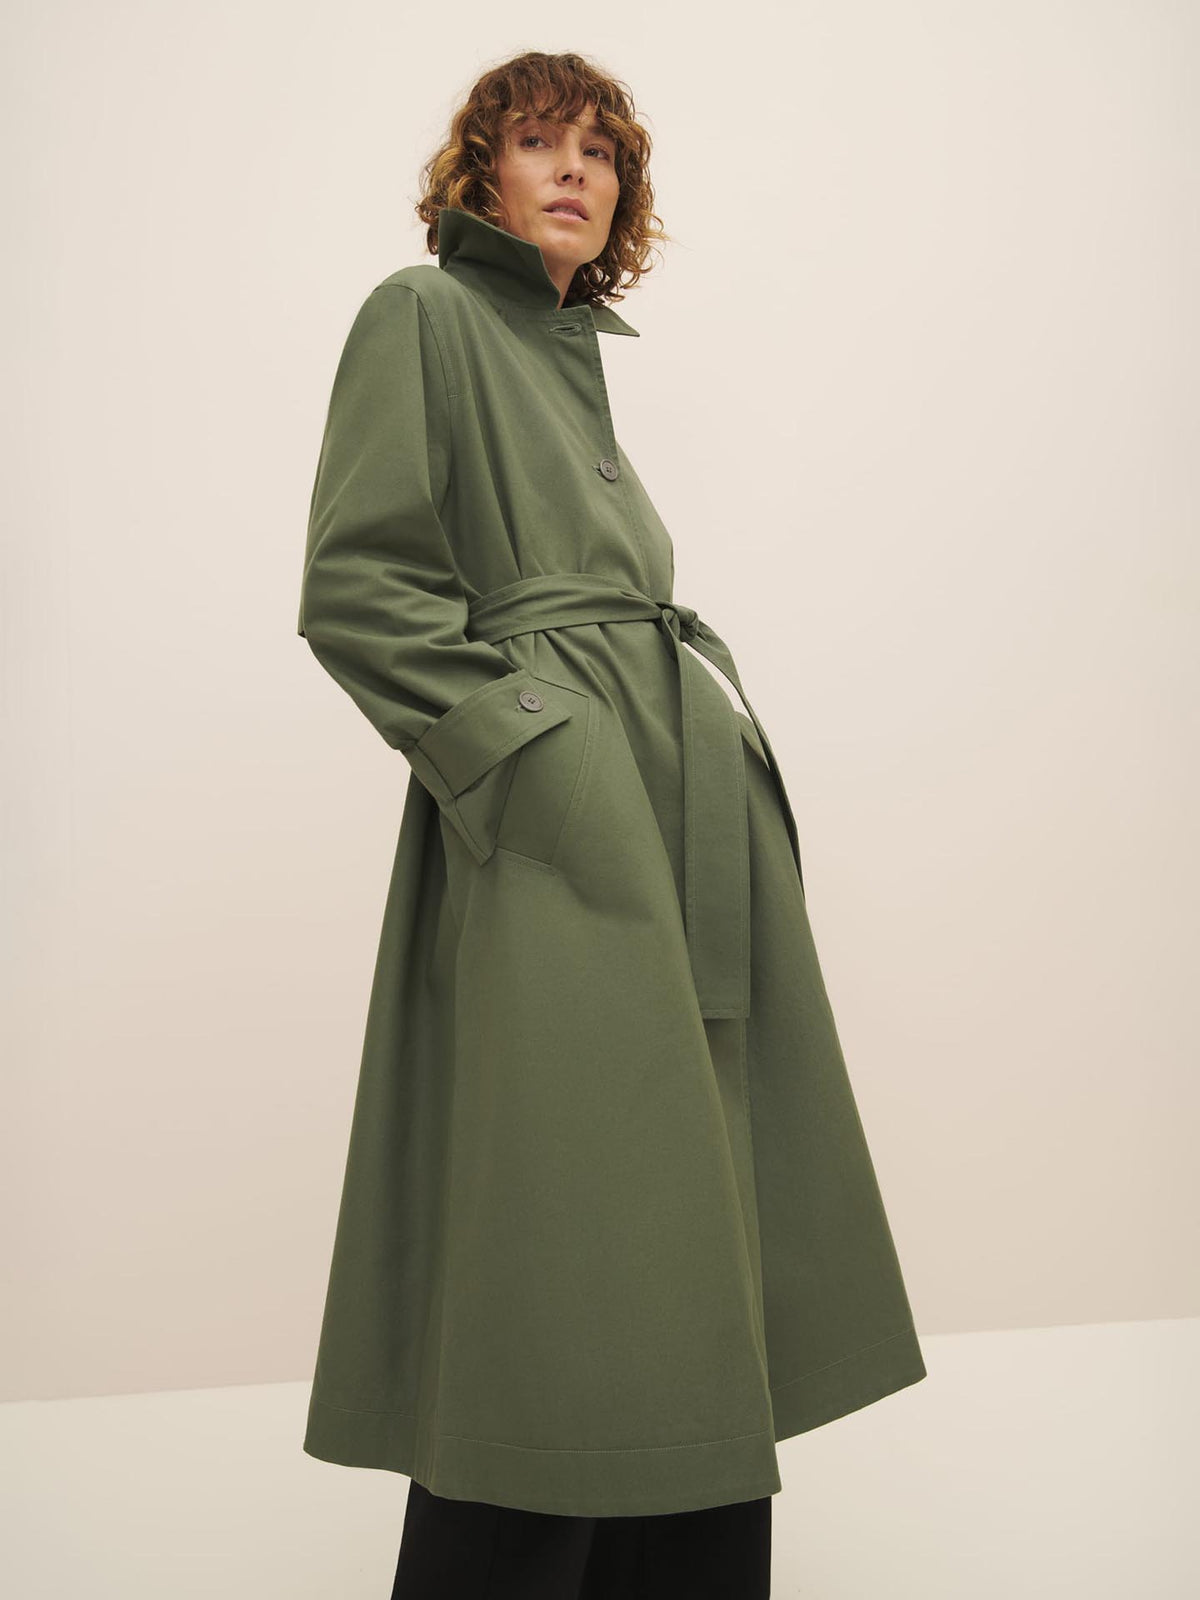 Woman modeling a Cleo trench coat in sage with a belt, designed for a relaxed fit by Kowtow.